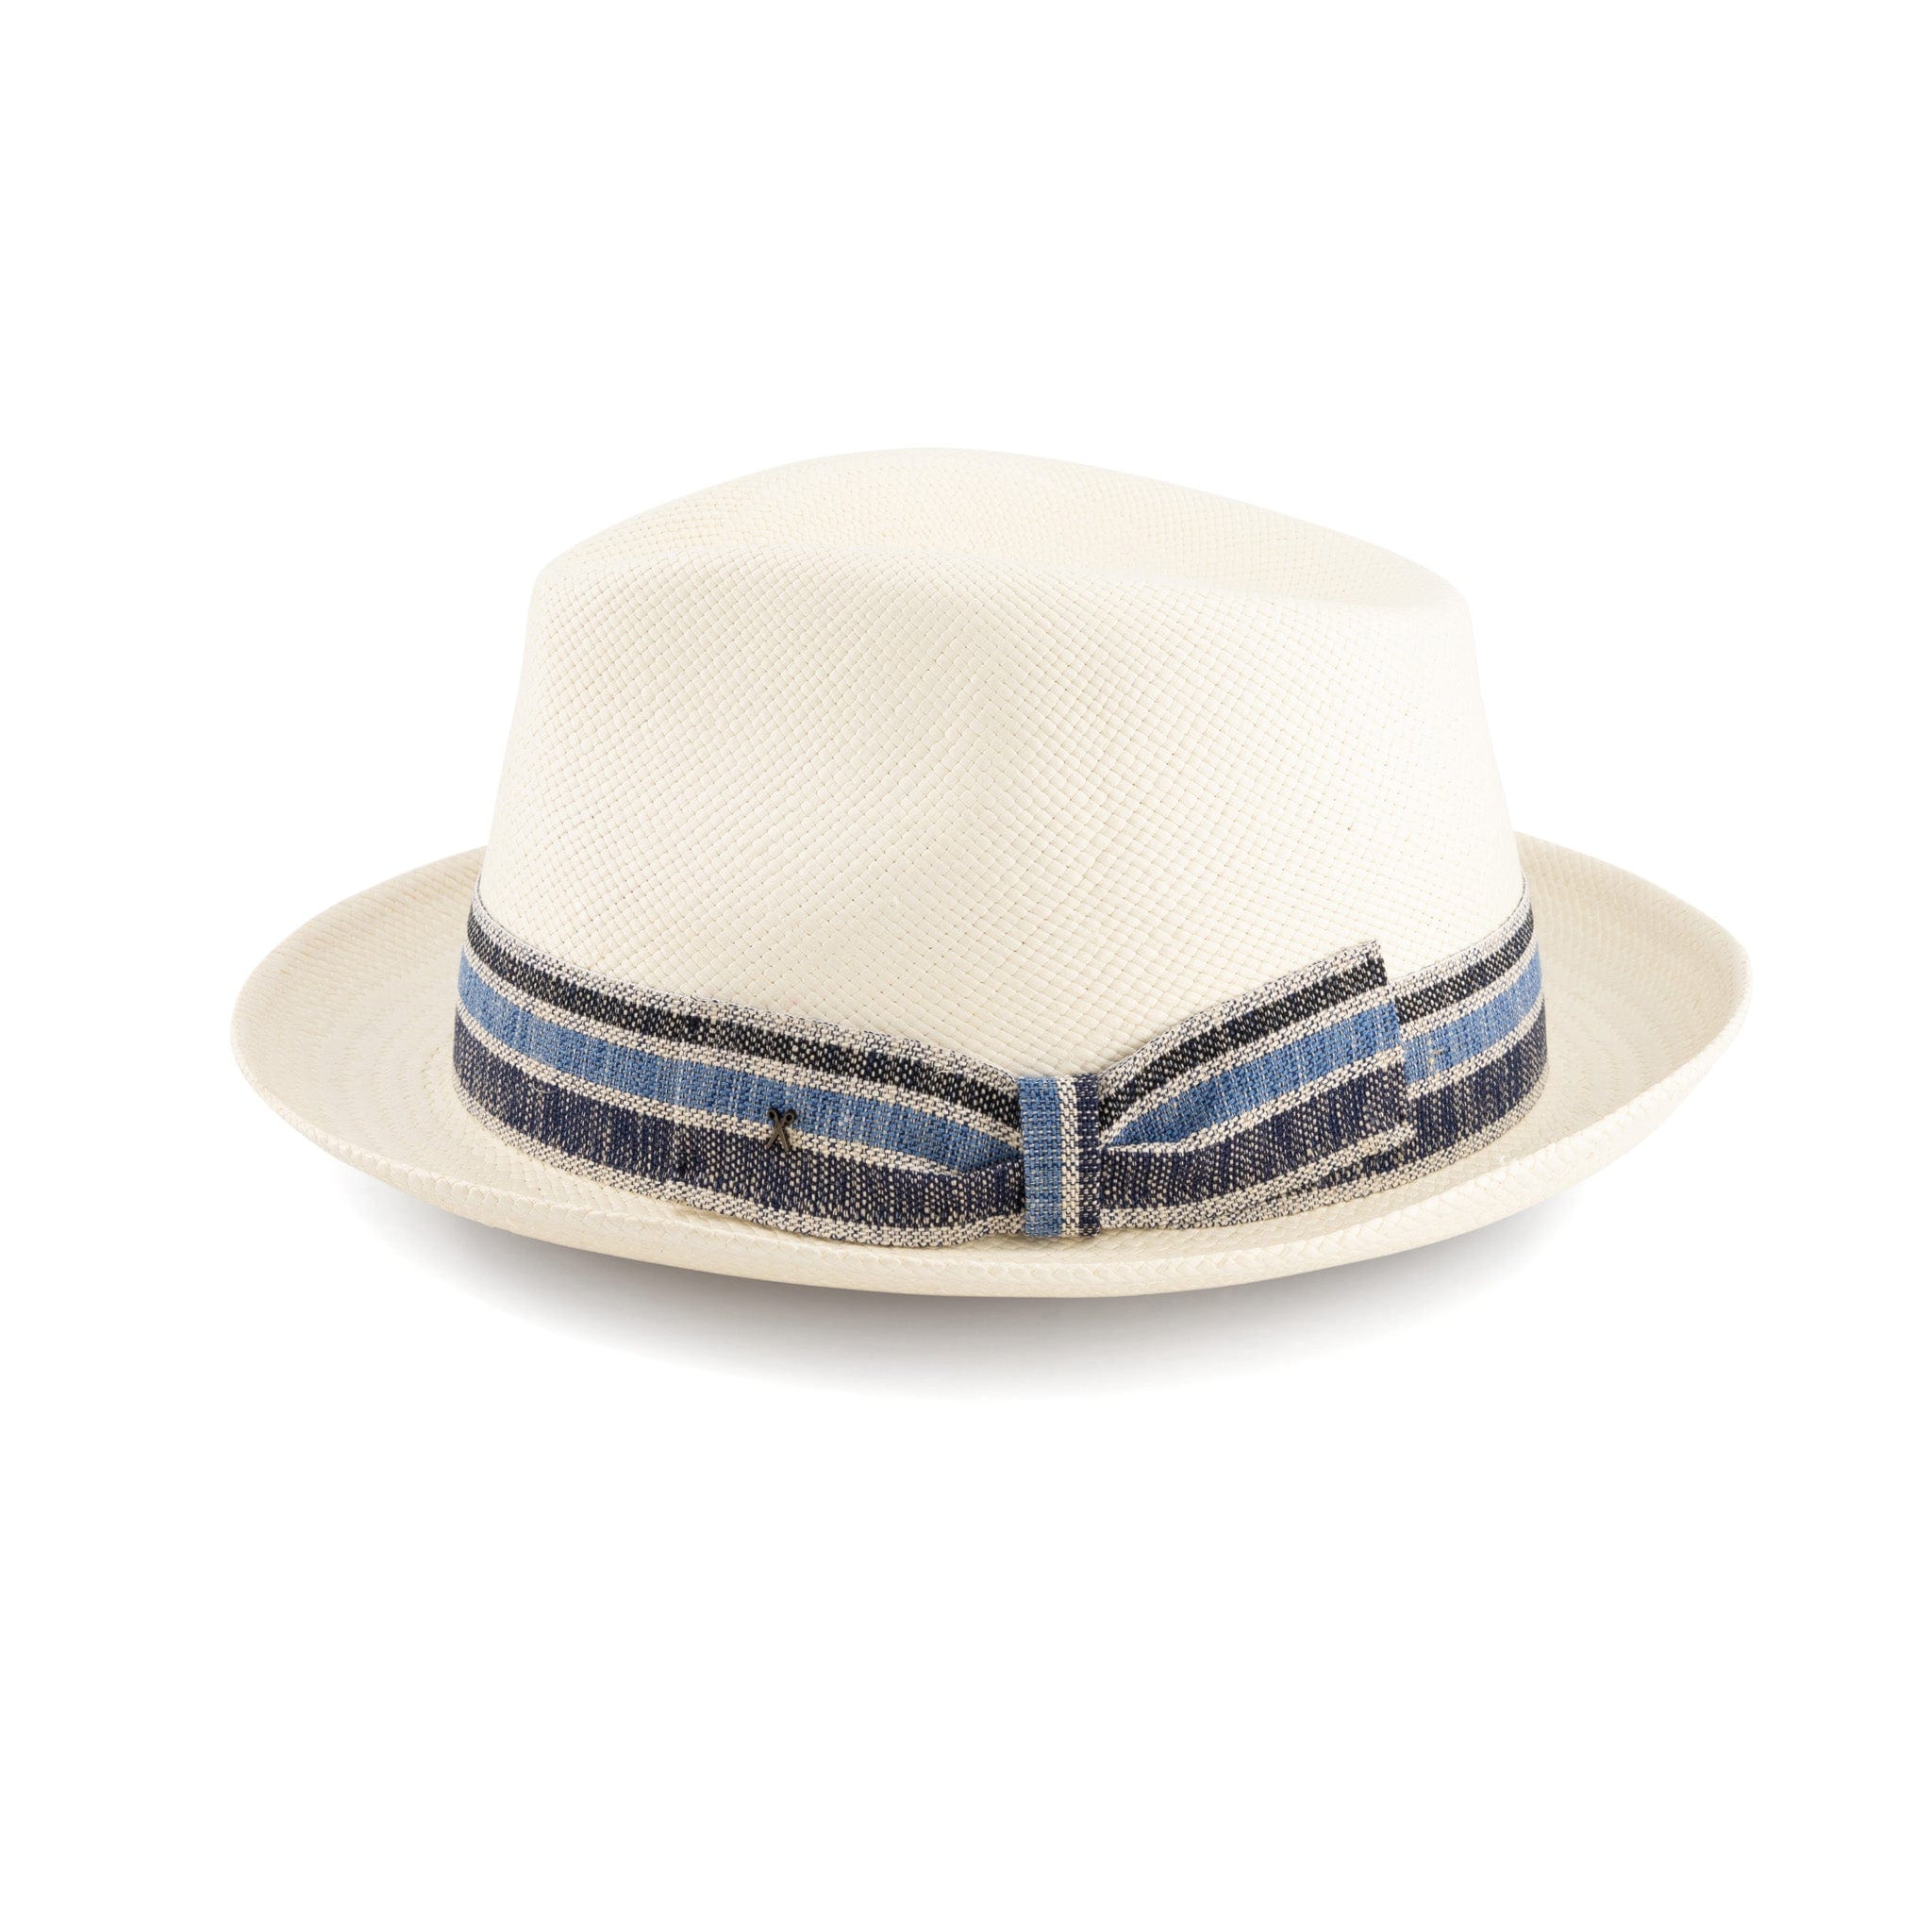 Unisex | Trilby Panama Hat | White Toquilla | Blue Multi Band | Made in Italy